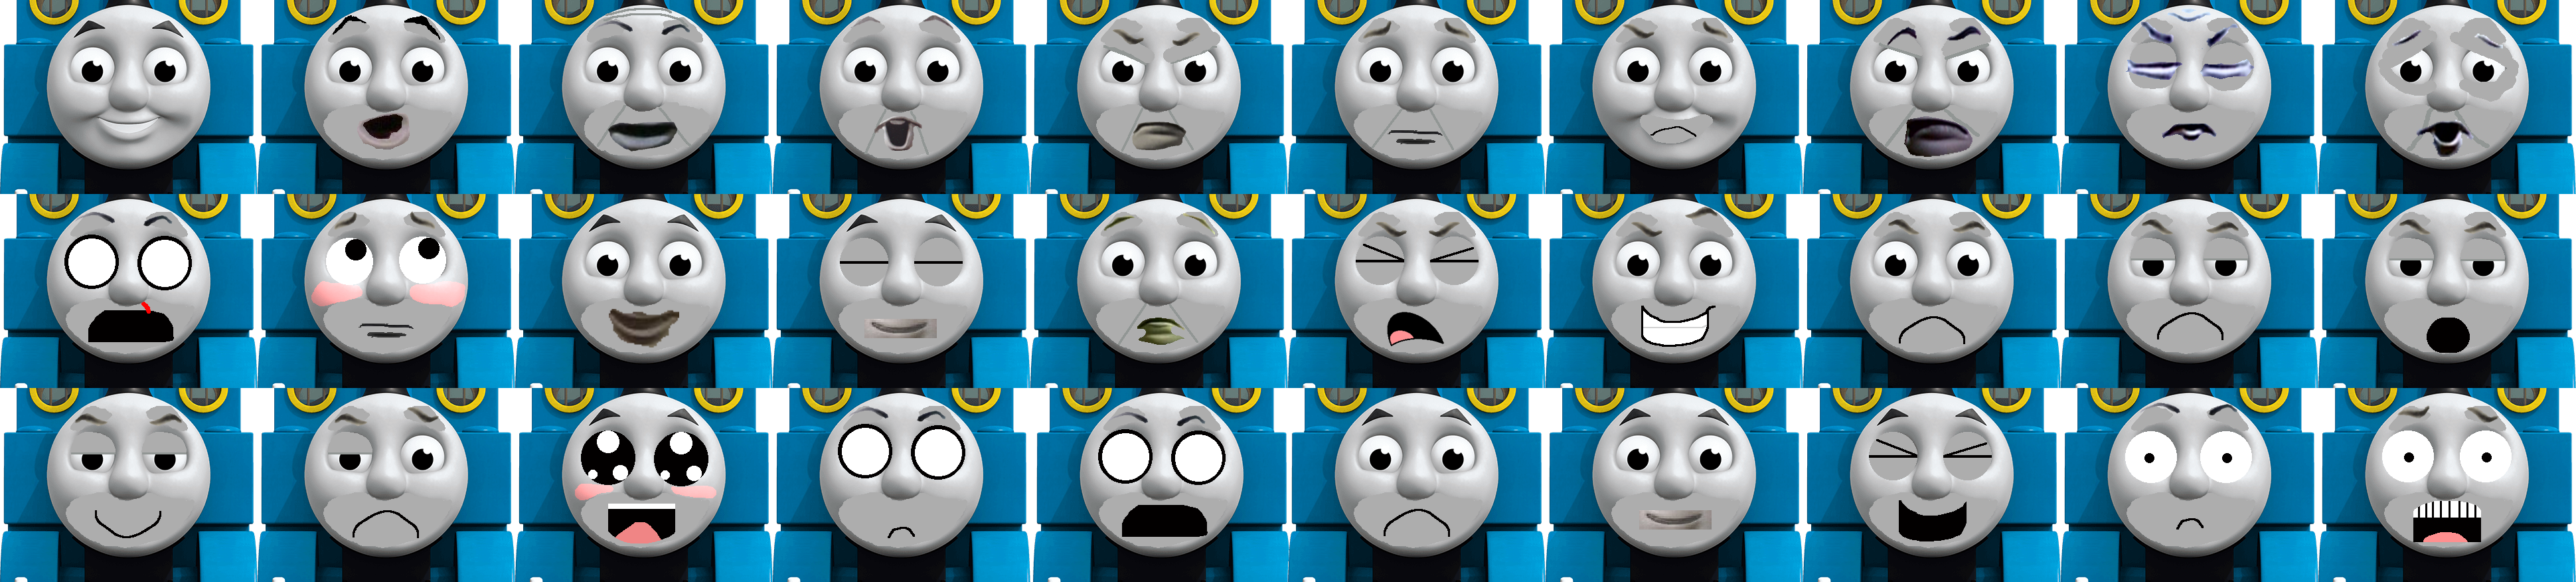 Thomas The Tank Engine Faces By Glasolia1990 On Devia - vrogue.co